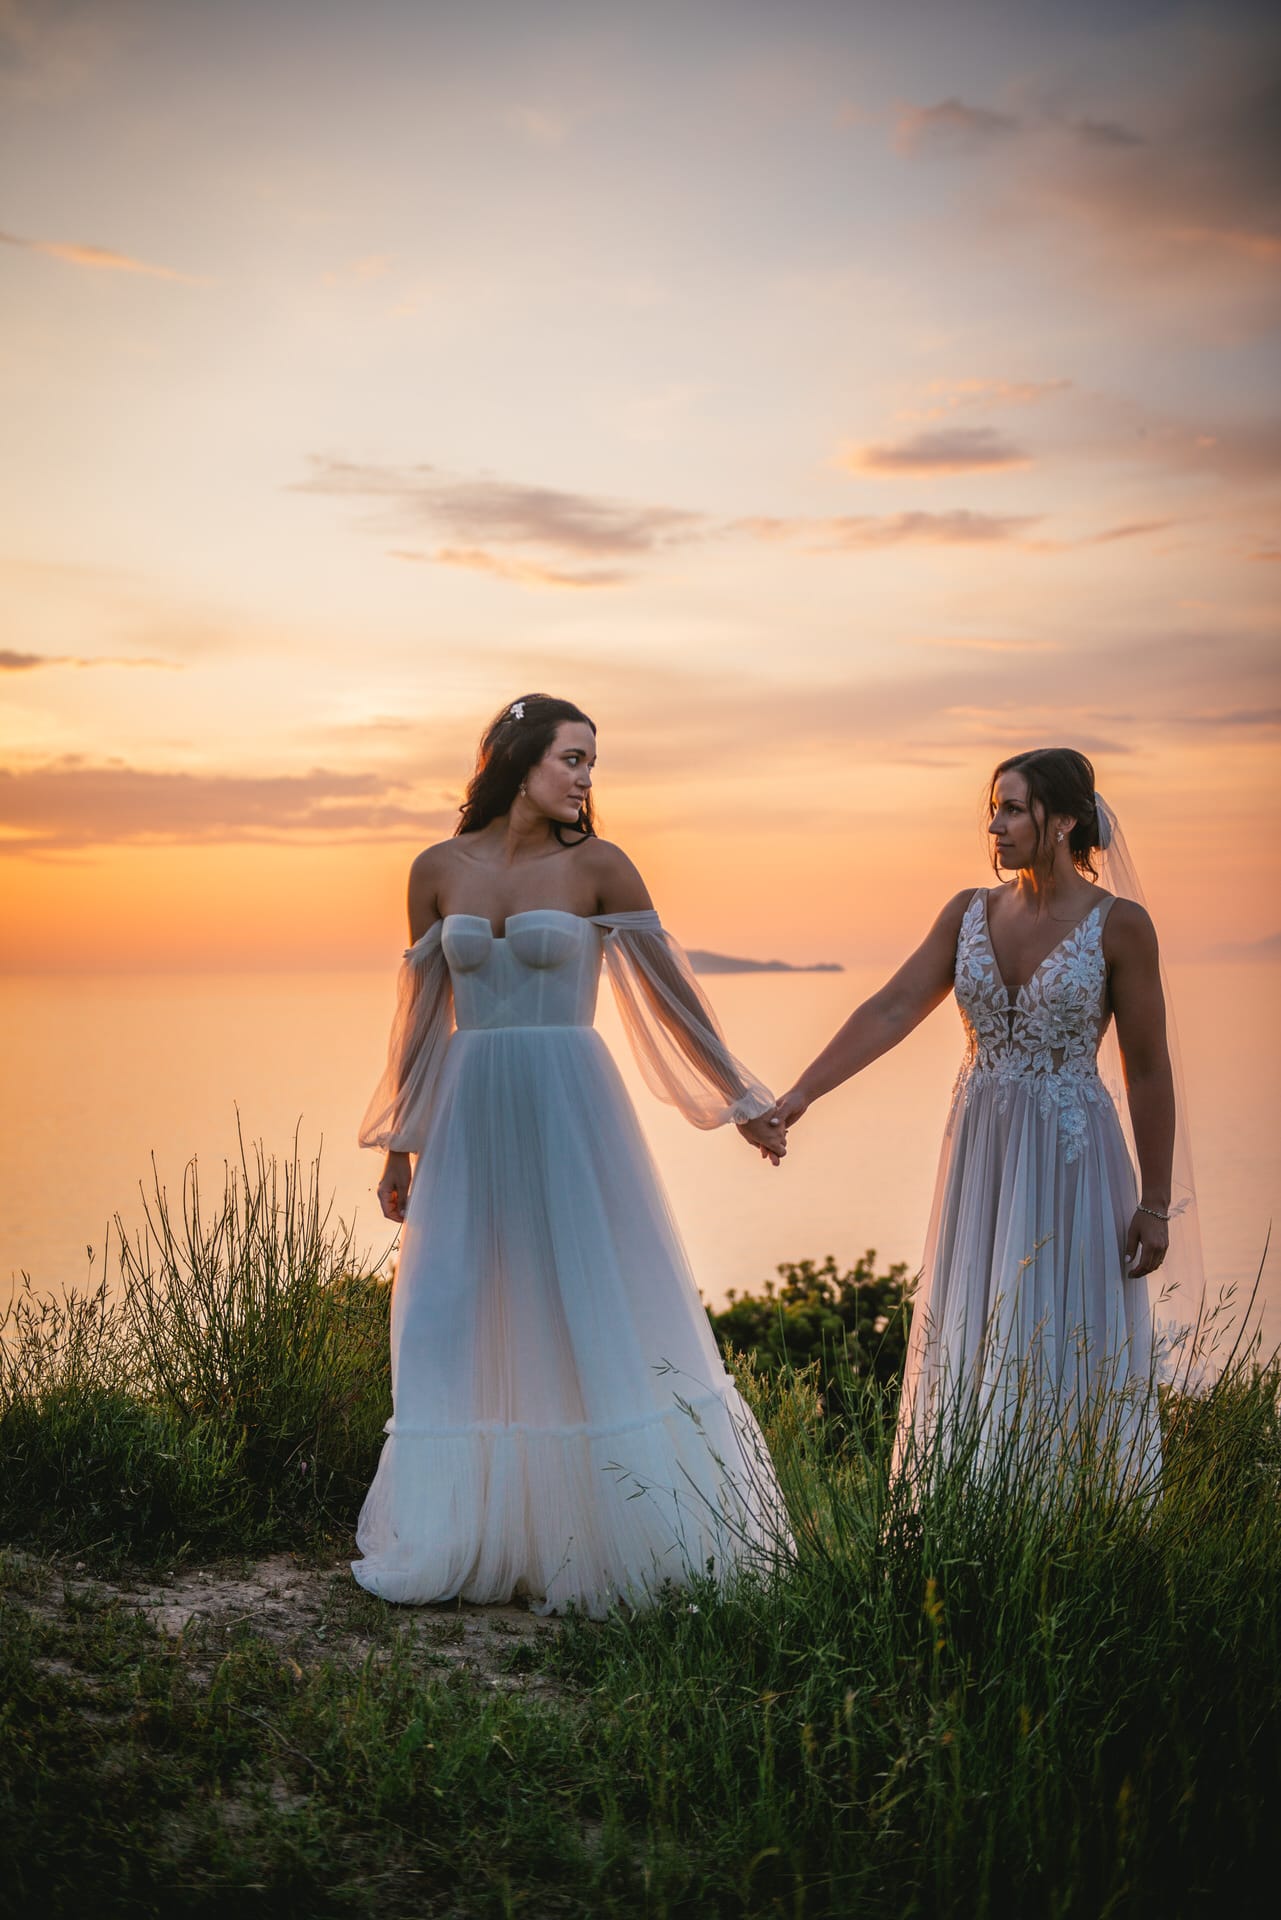 Brides walking hand in hand during sunset, a shared path in their Corfu elopement.